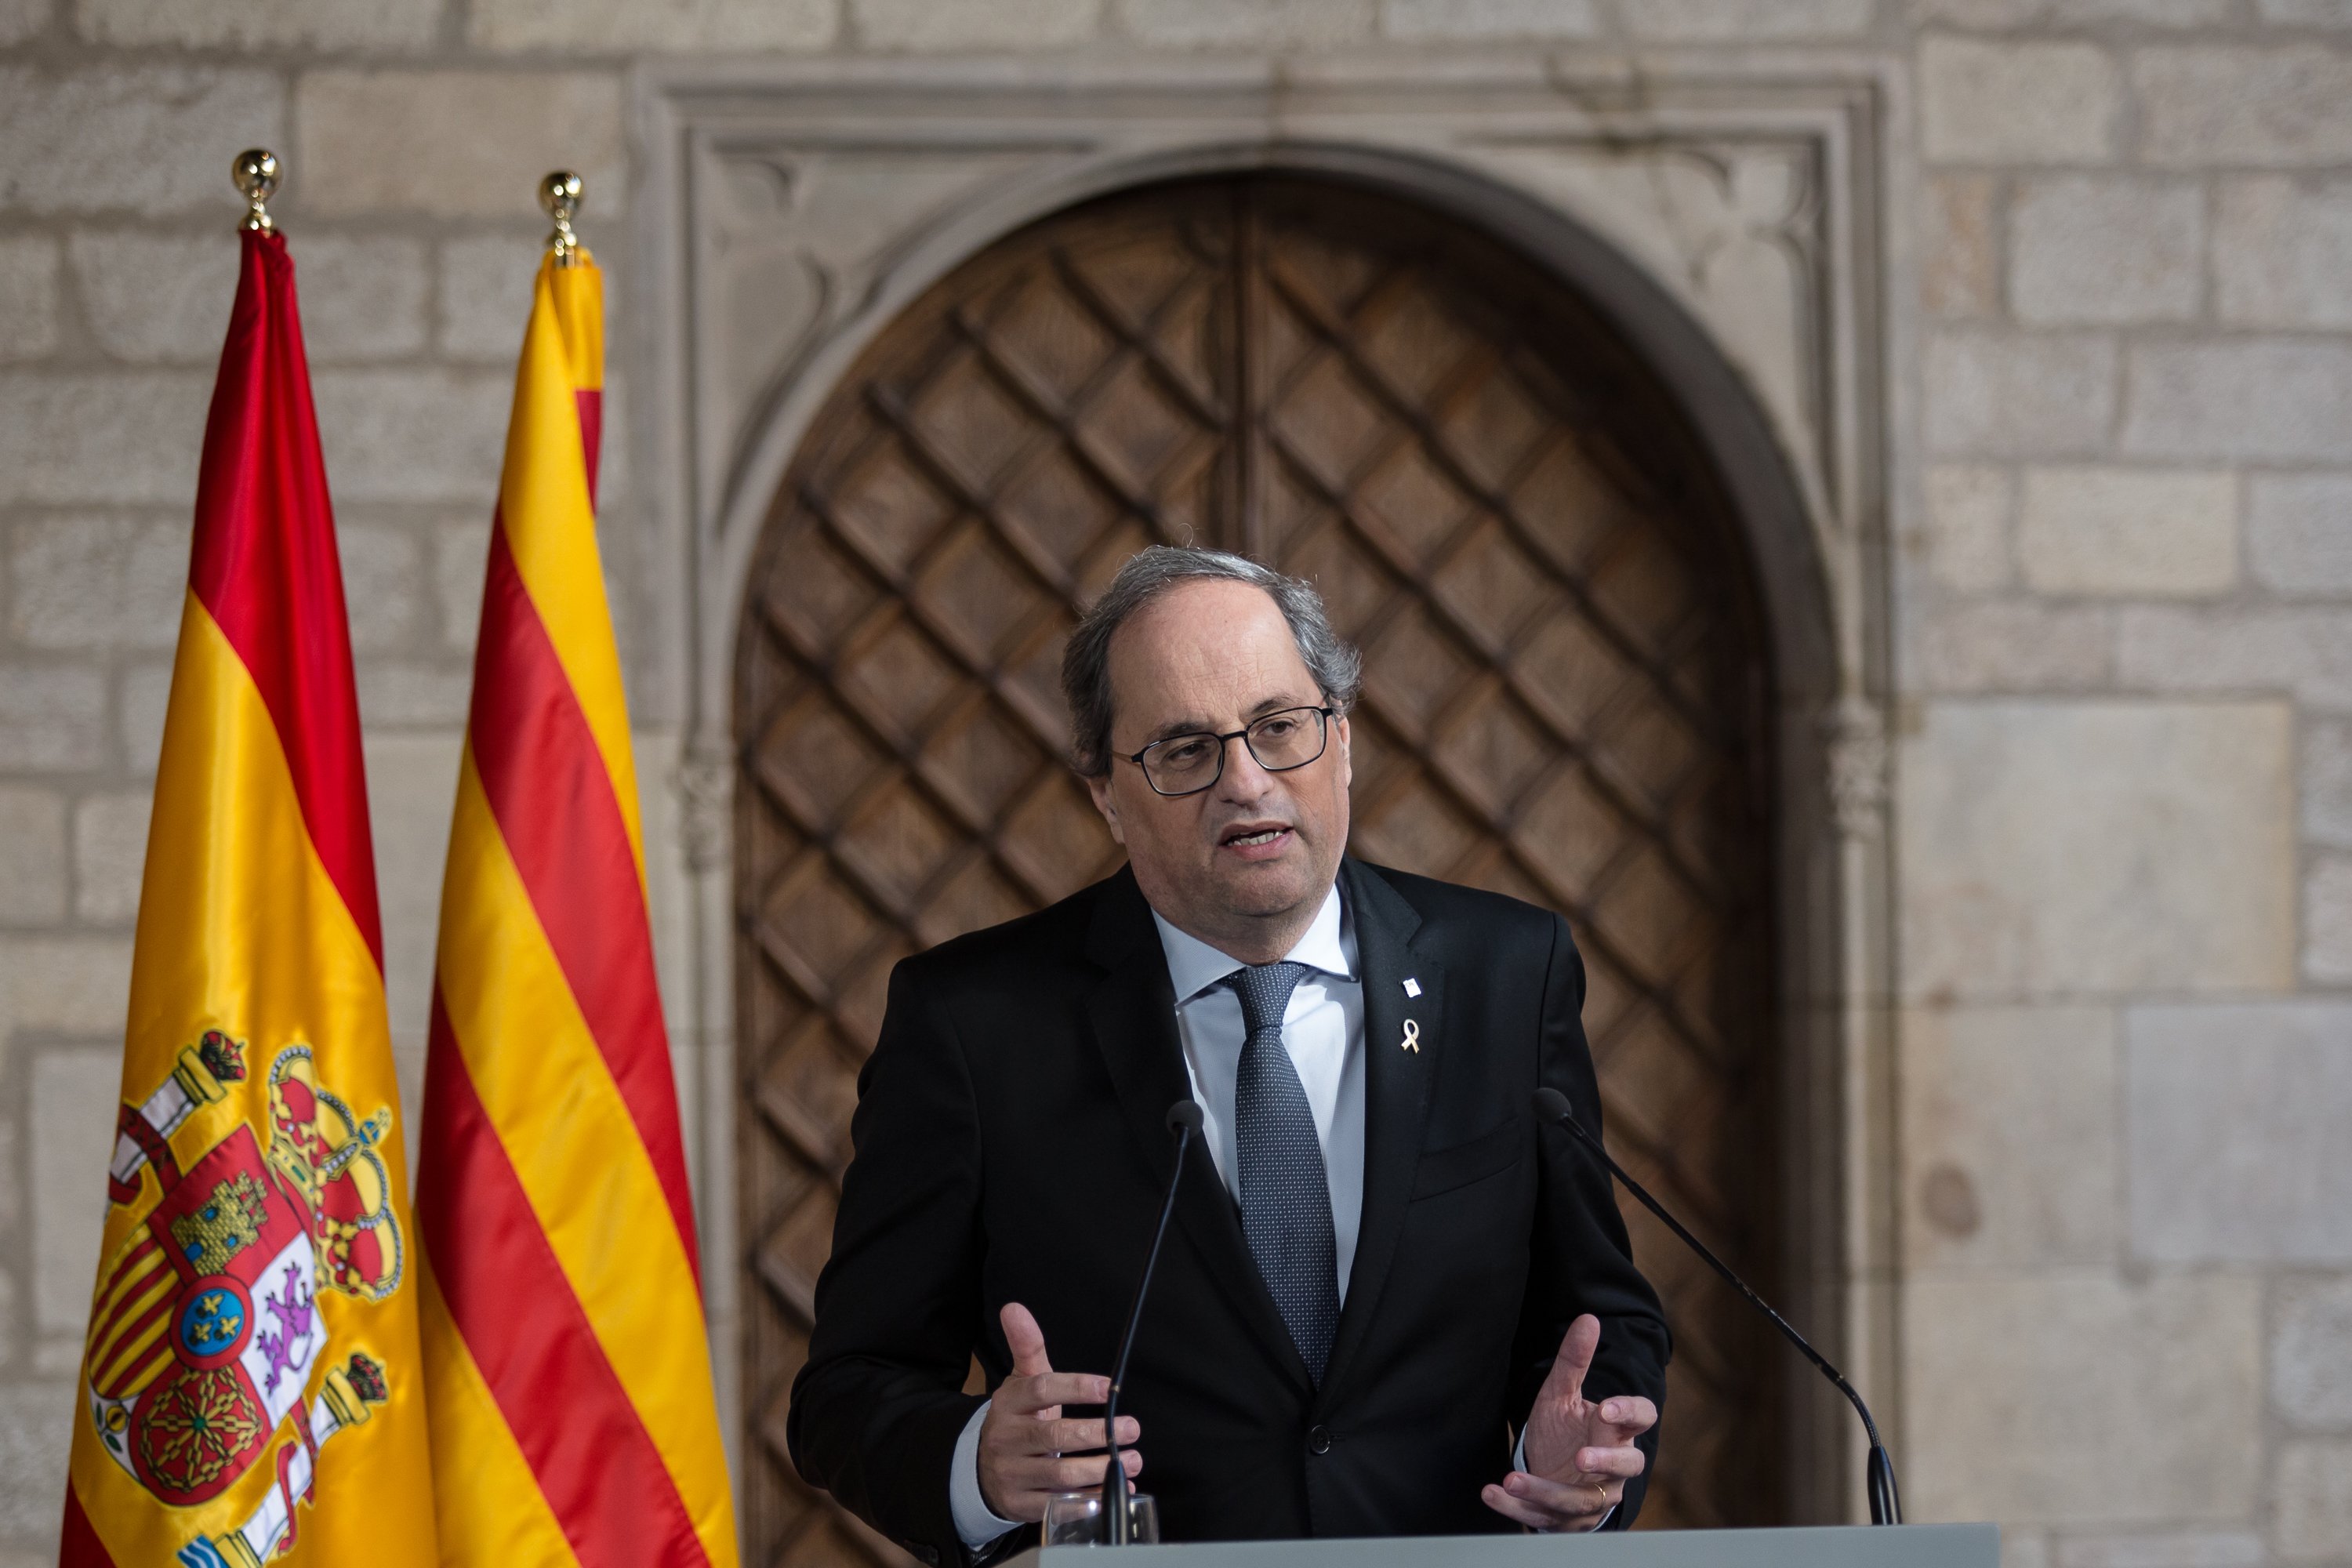 After leaders' summit, Catalan president tells Reuters: "We will be independent"